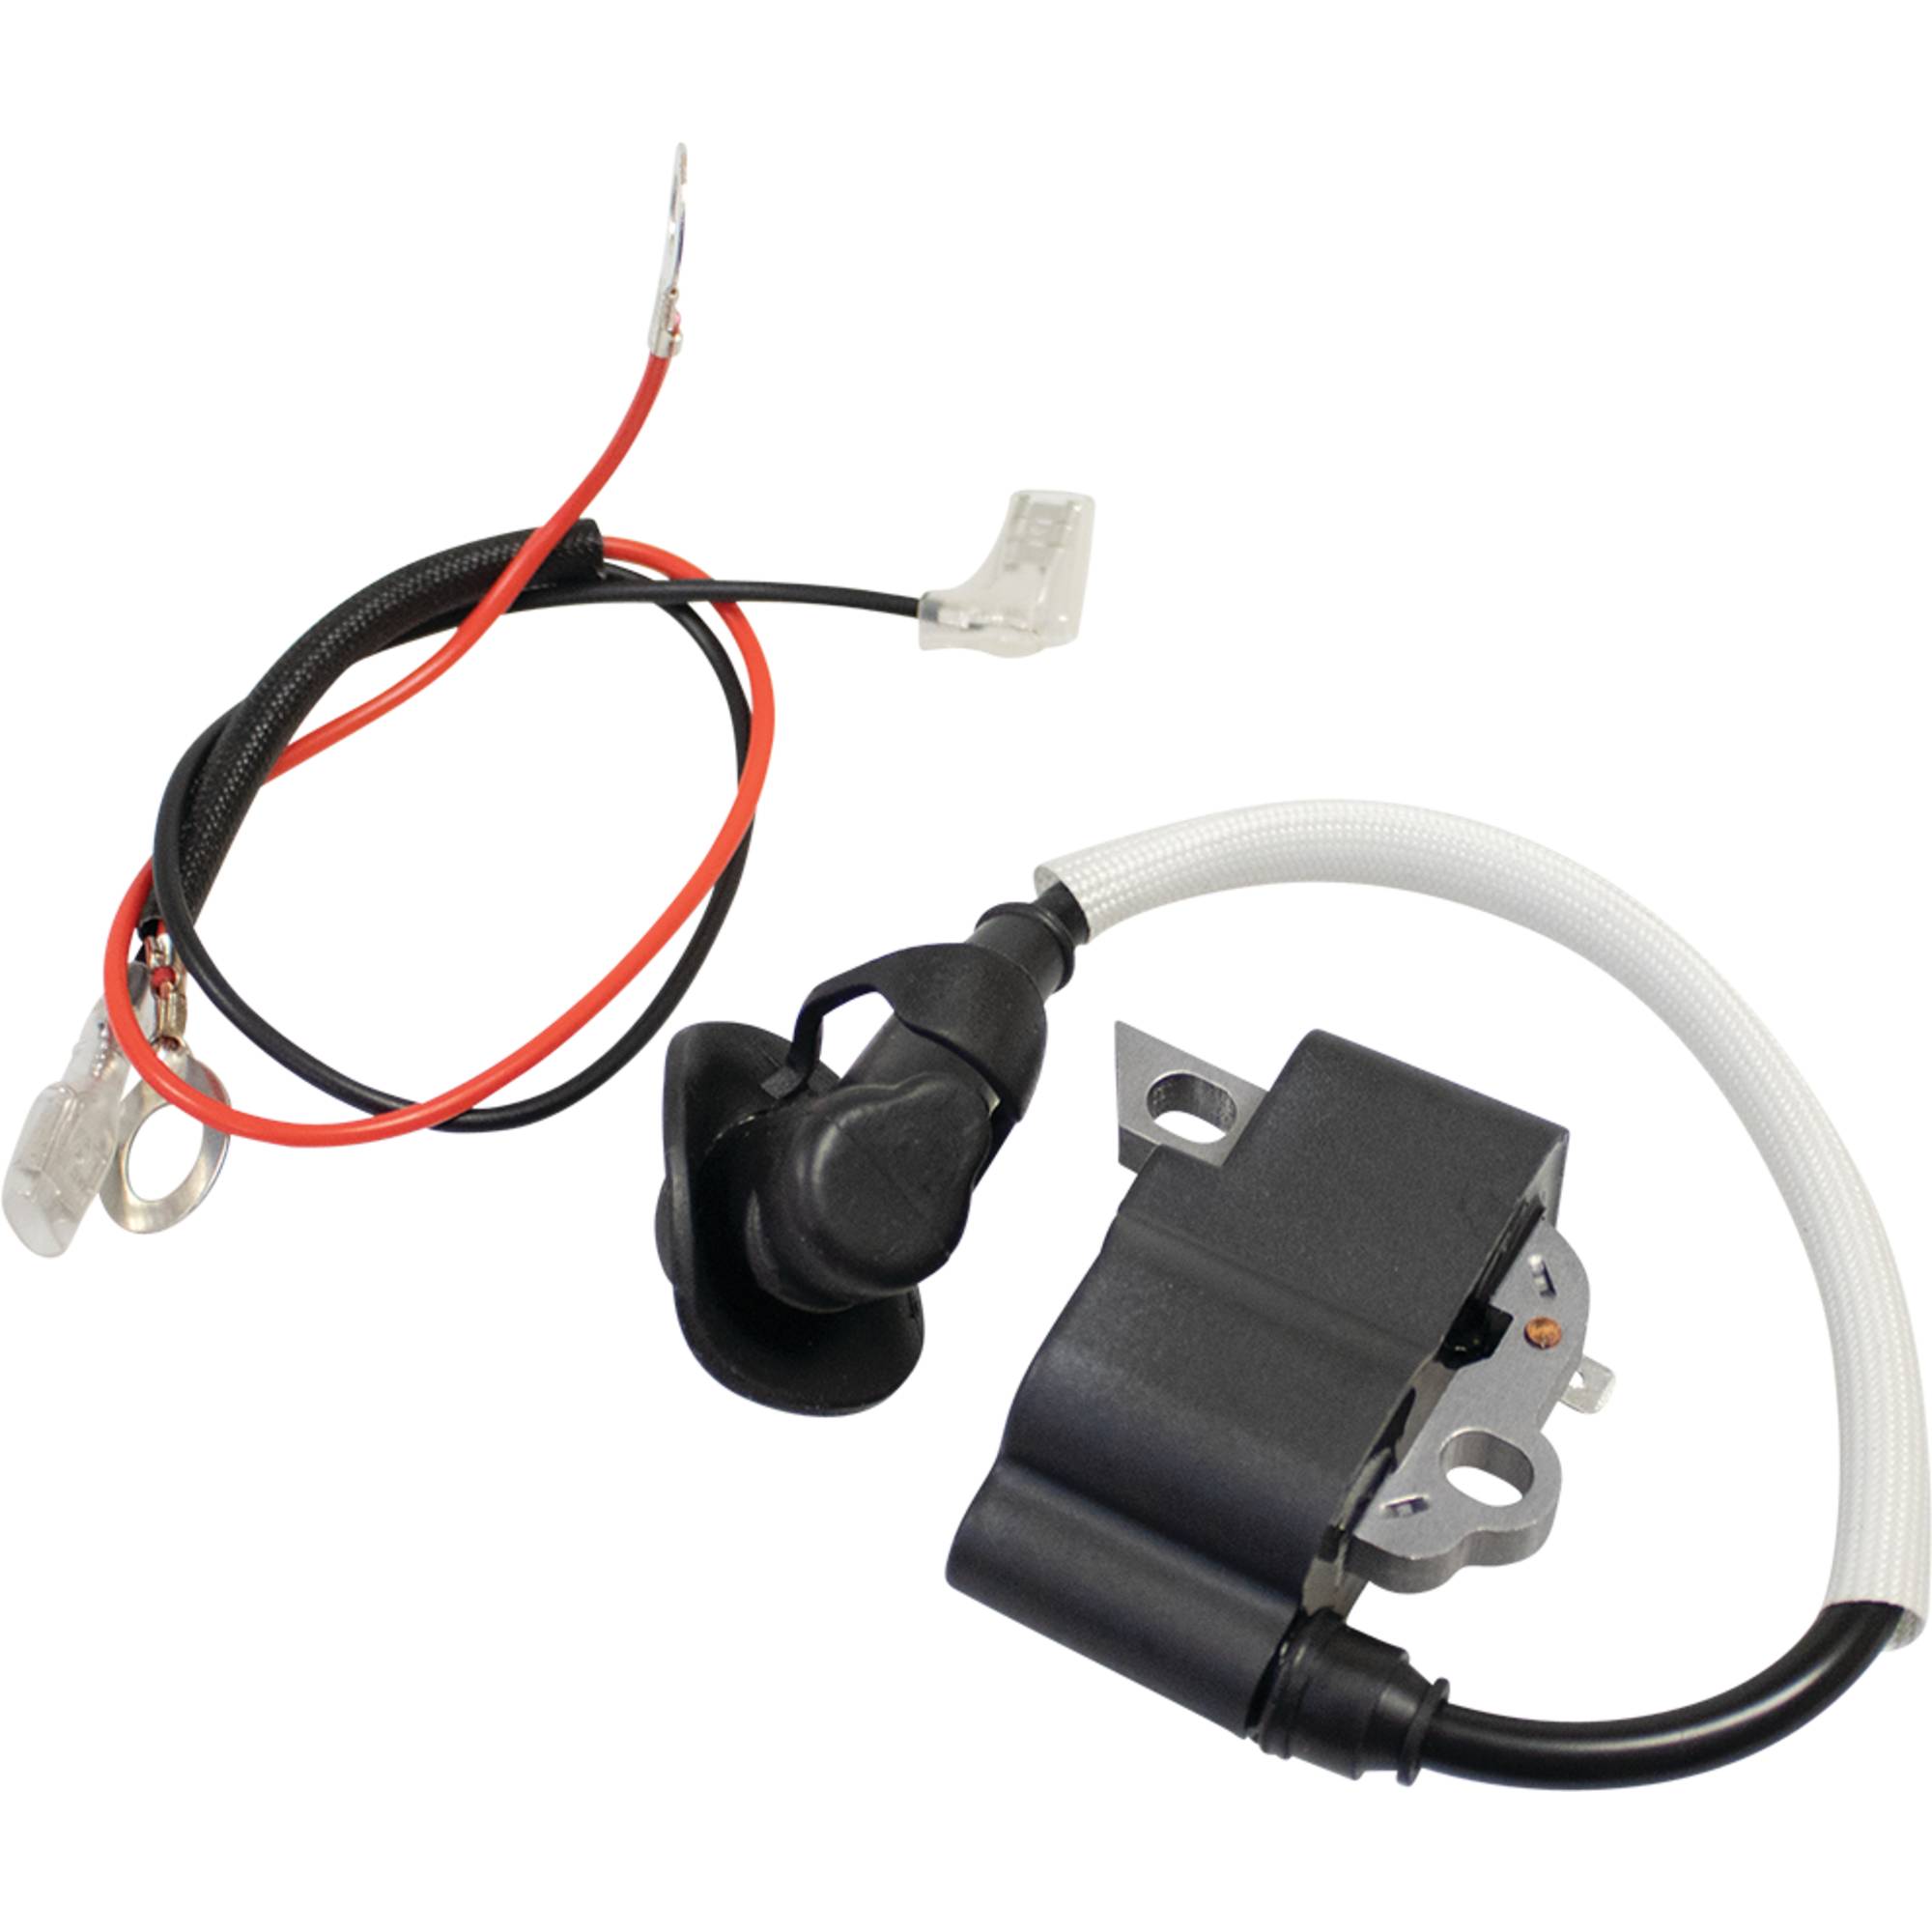 Stens 600-988 Ignition Coil for Stihl 1135 400 1308